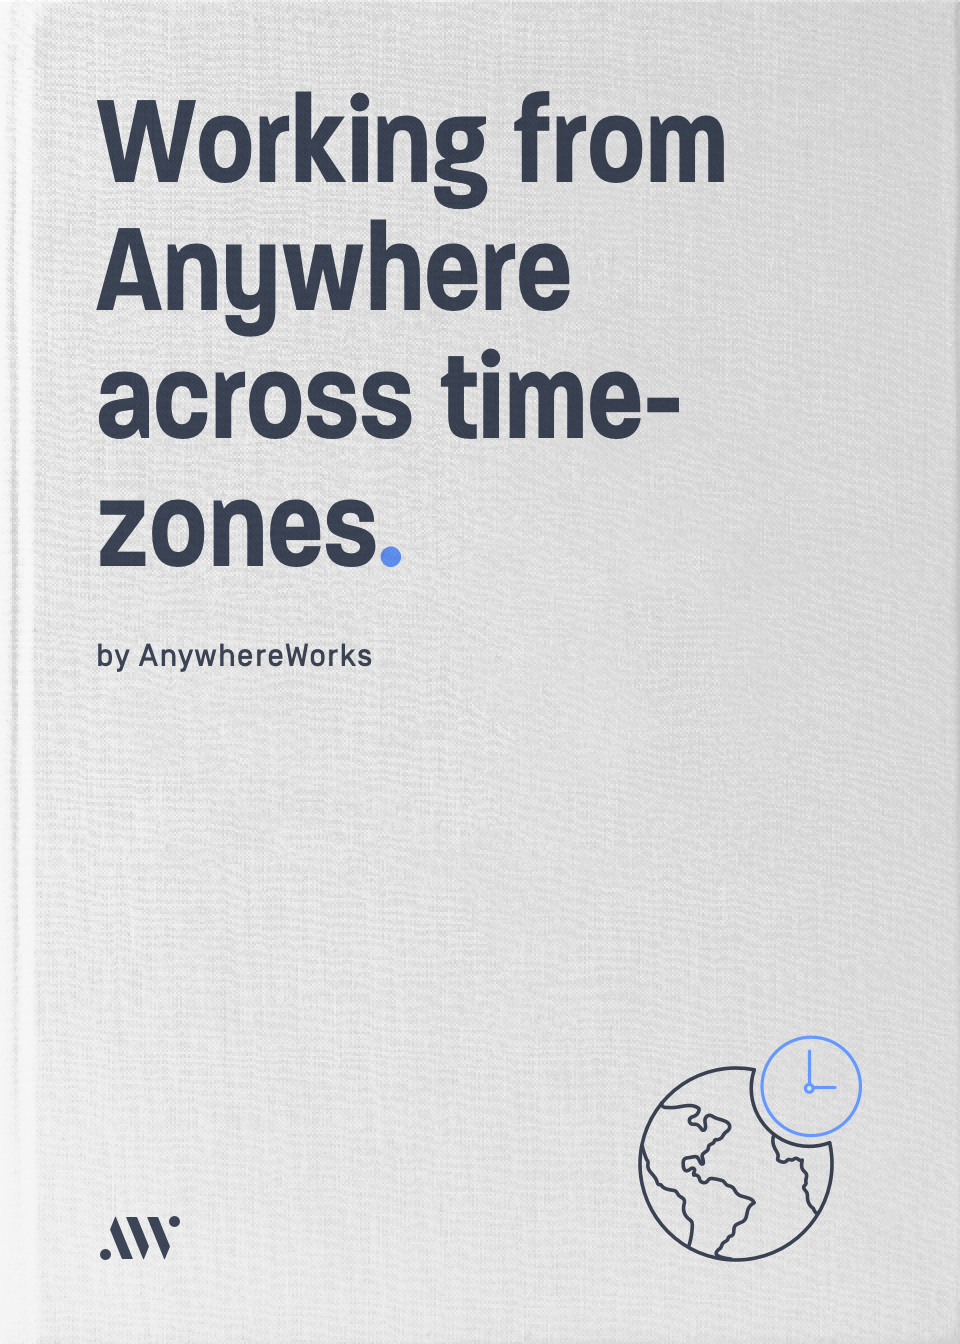 How to work effectively across time zones